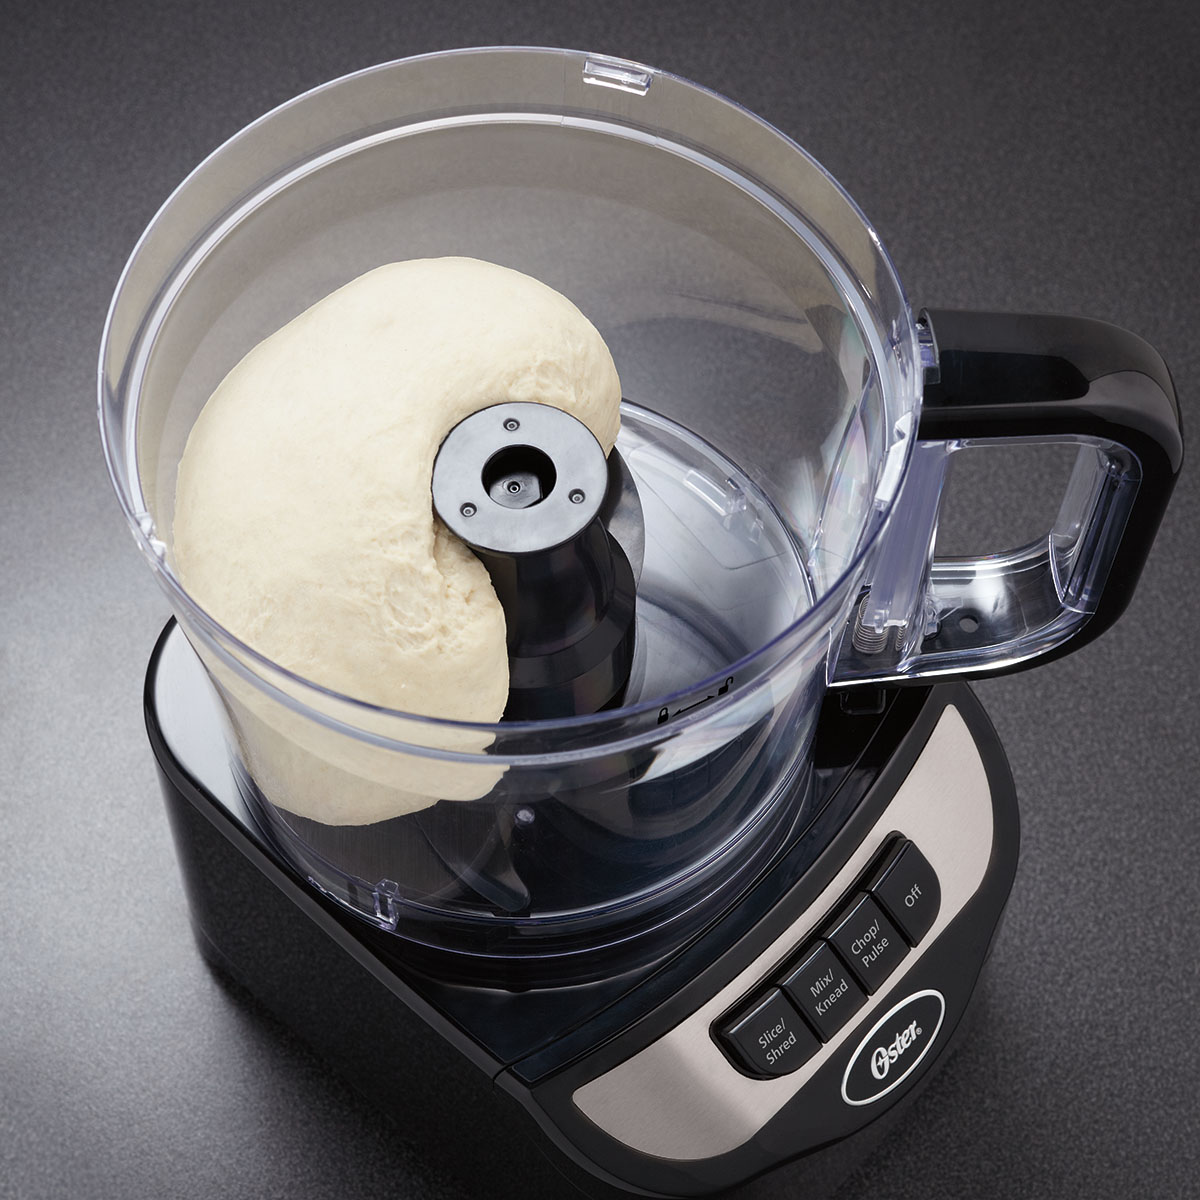 Jnnwebdesign What Can A Food Processor Do